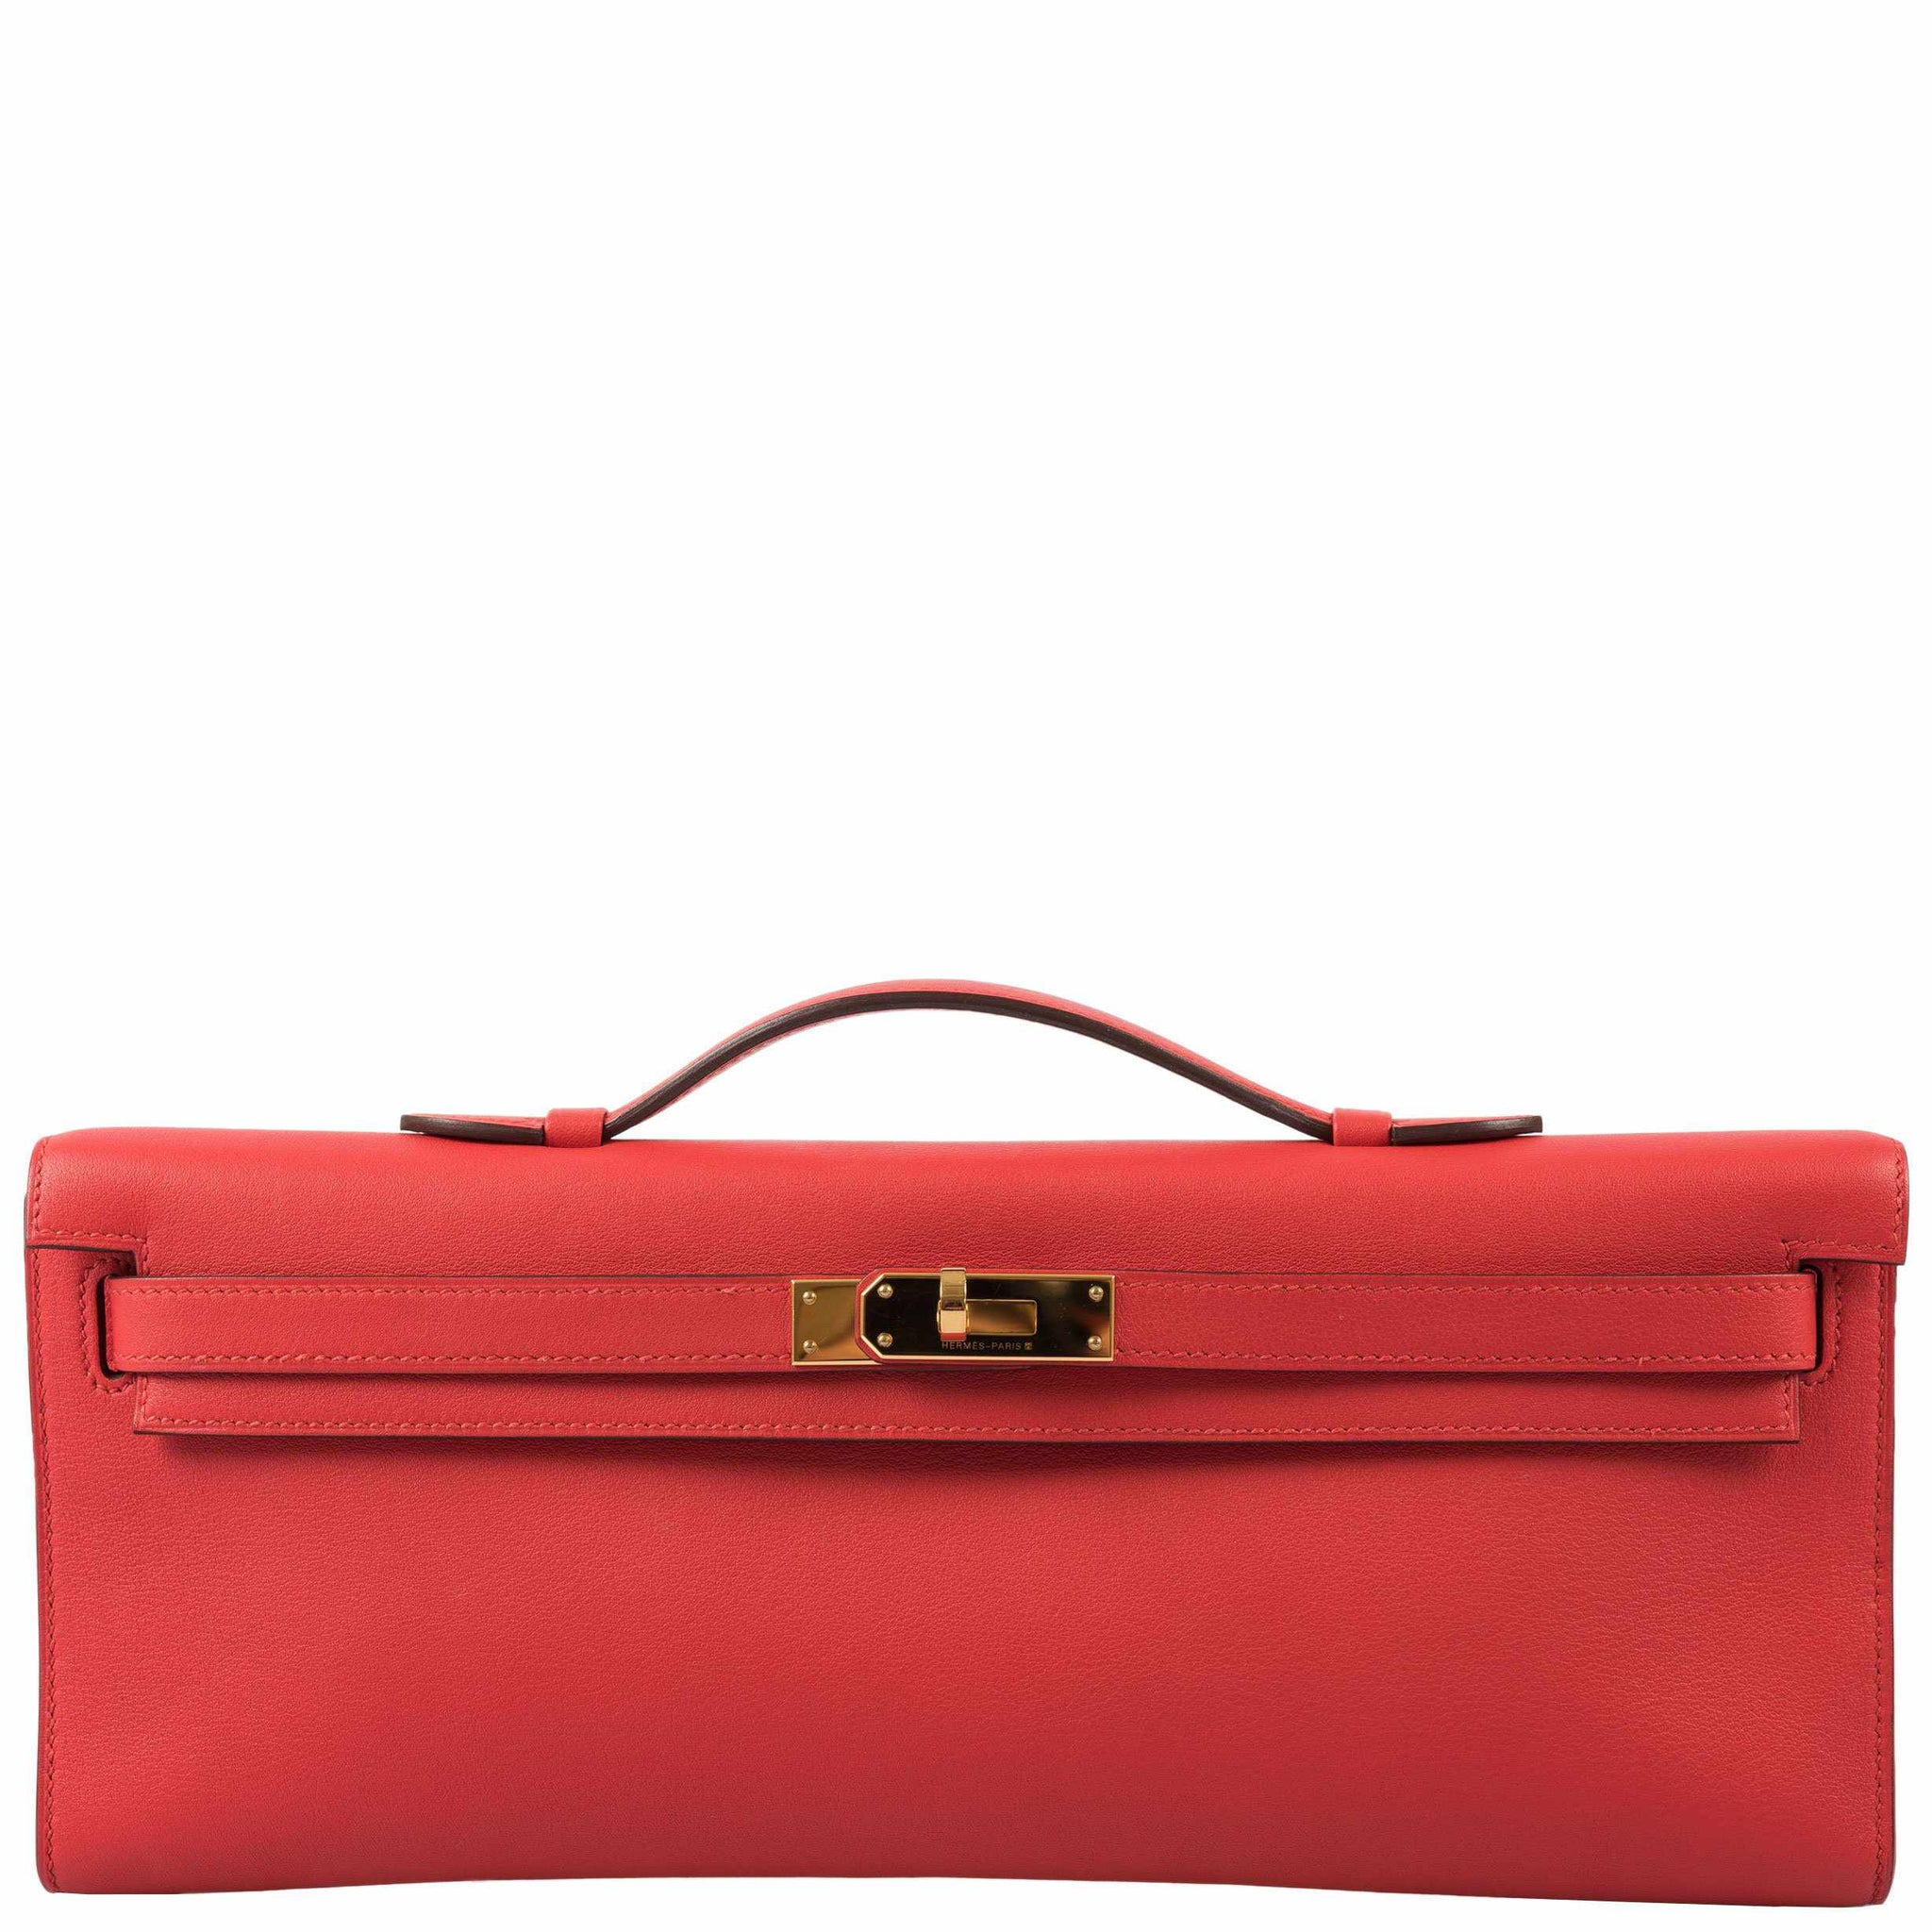 Kelly Pochette Our Price: $18800 CAD / $13800 USD Color: Rouge Tomate (Red)  Size: 8.75 x 5.25 x 2.75 Material: Swift Leather Hardware:…